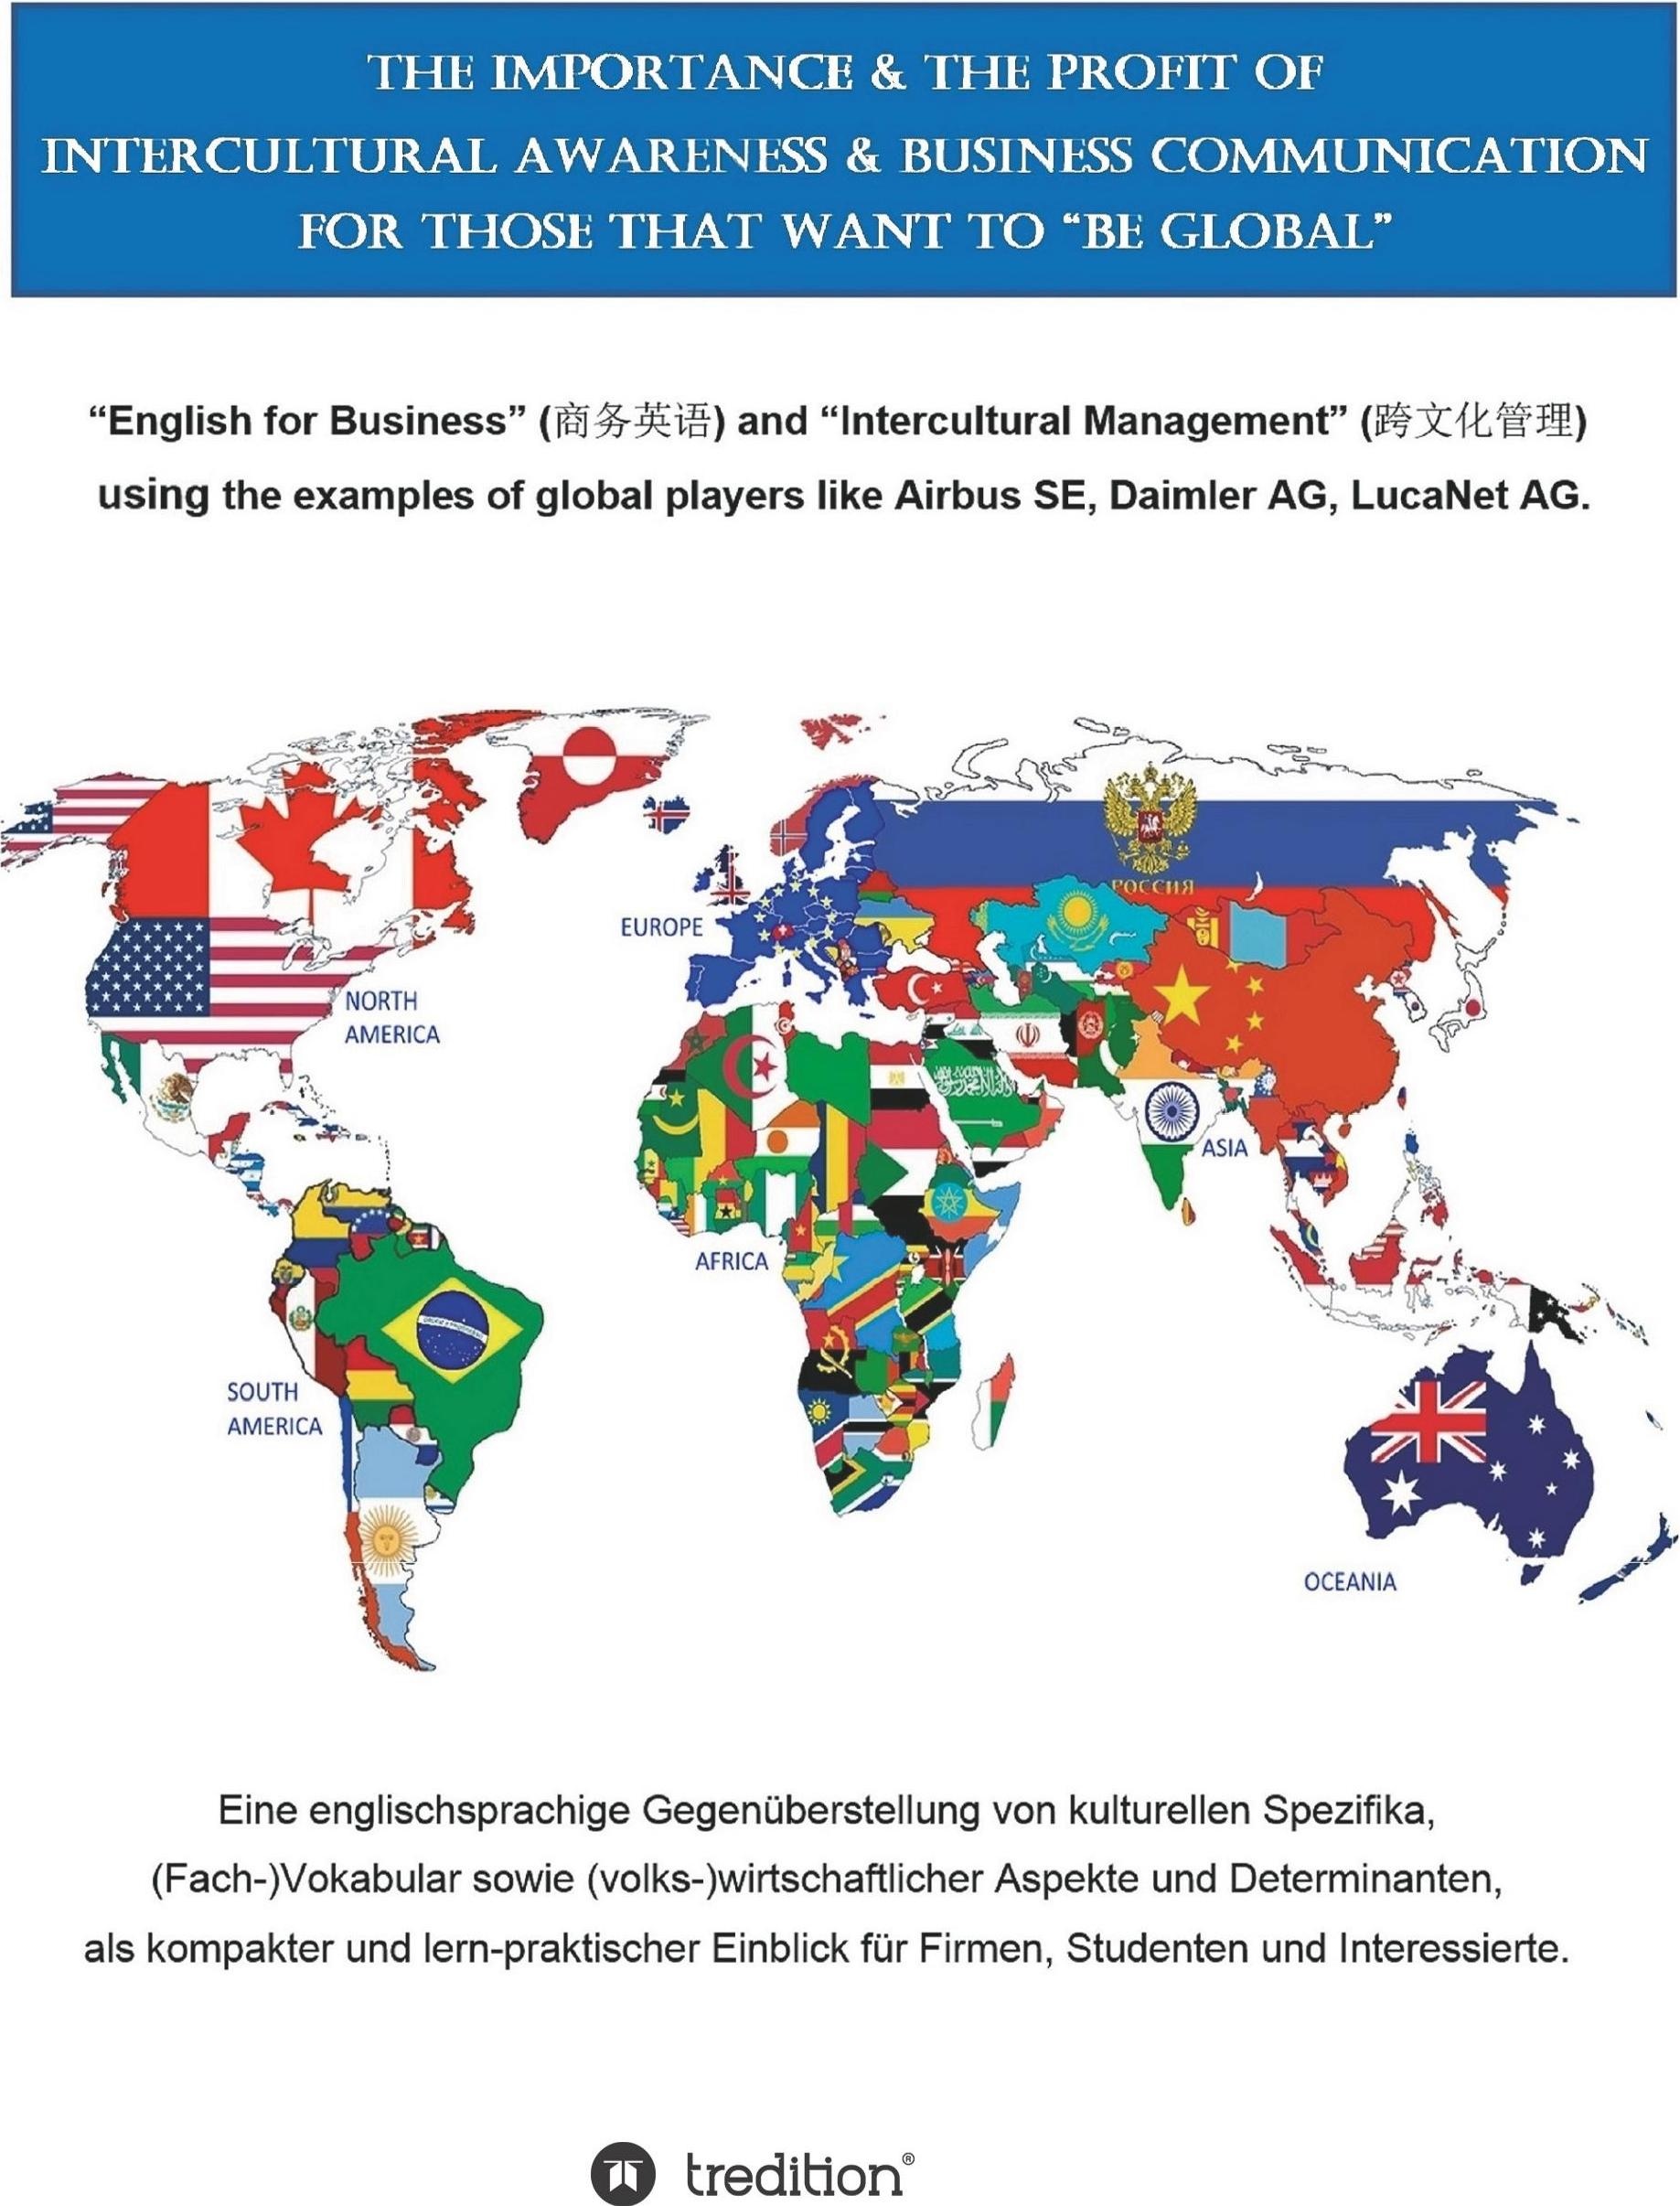 The Importance & the Profit of Intercultural Awareness & Business Communication for those that want, Sachbücher